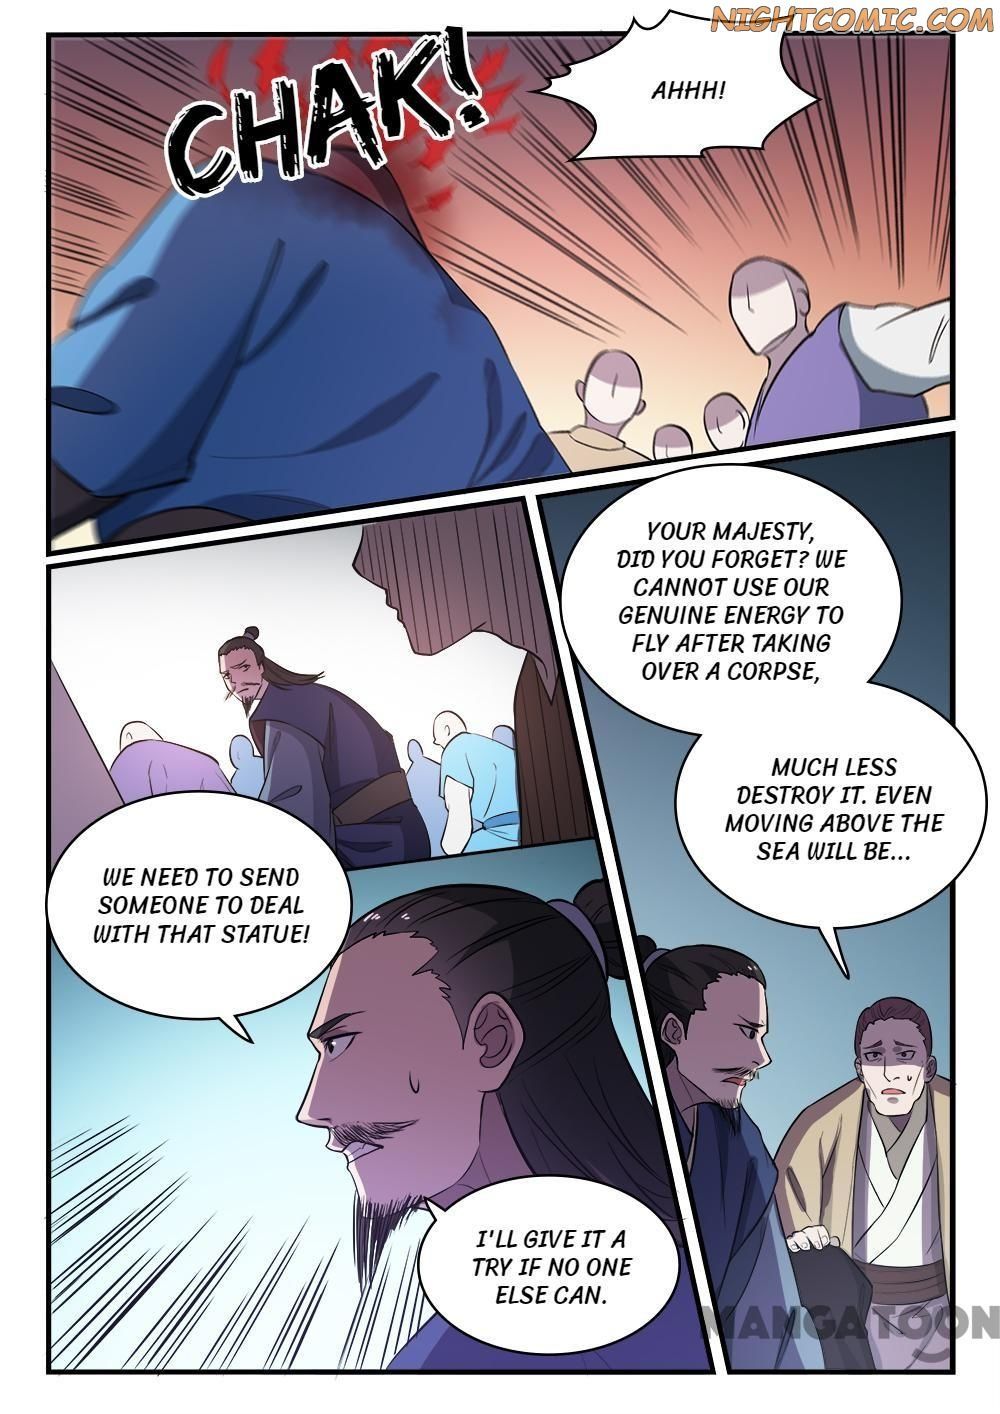 Apotheosis Chapter 442 - Page 4